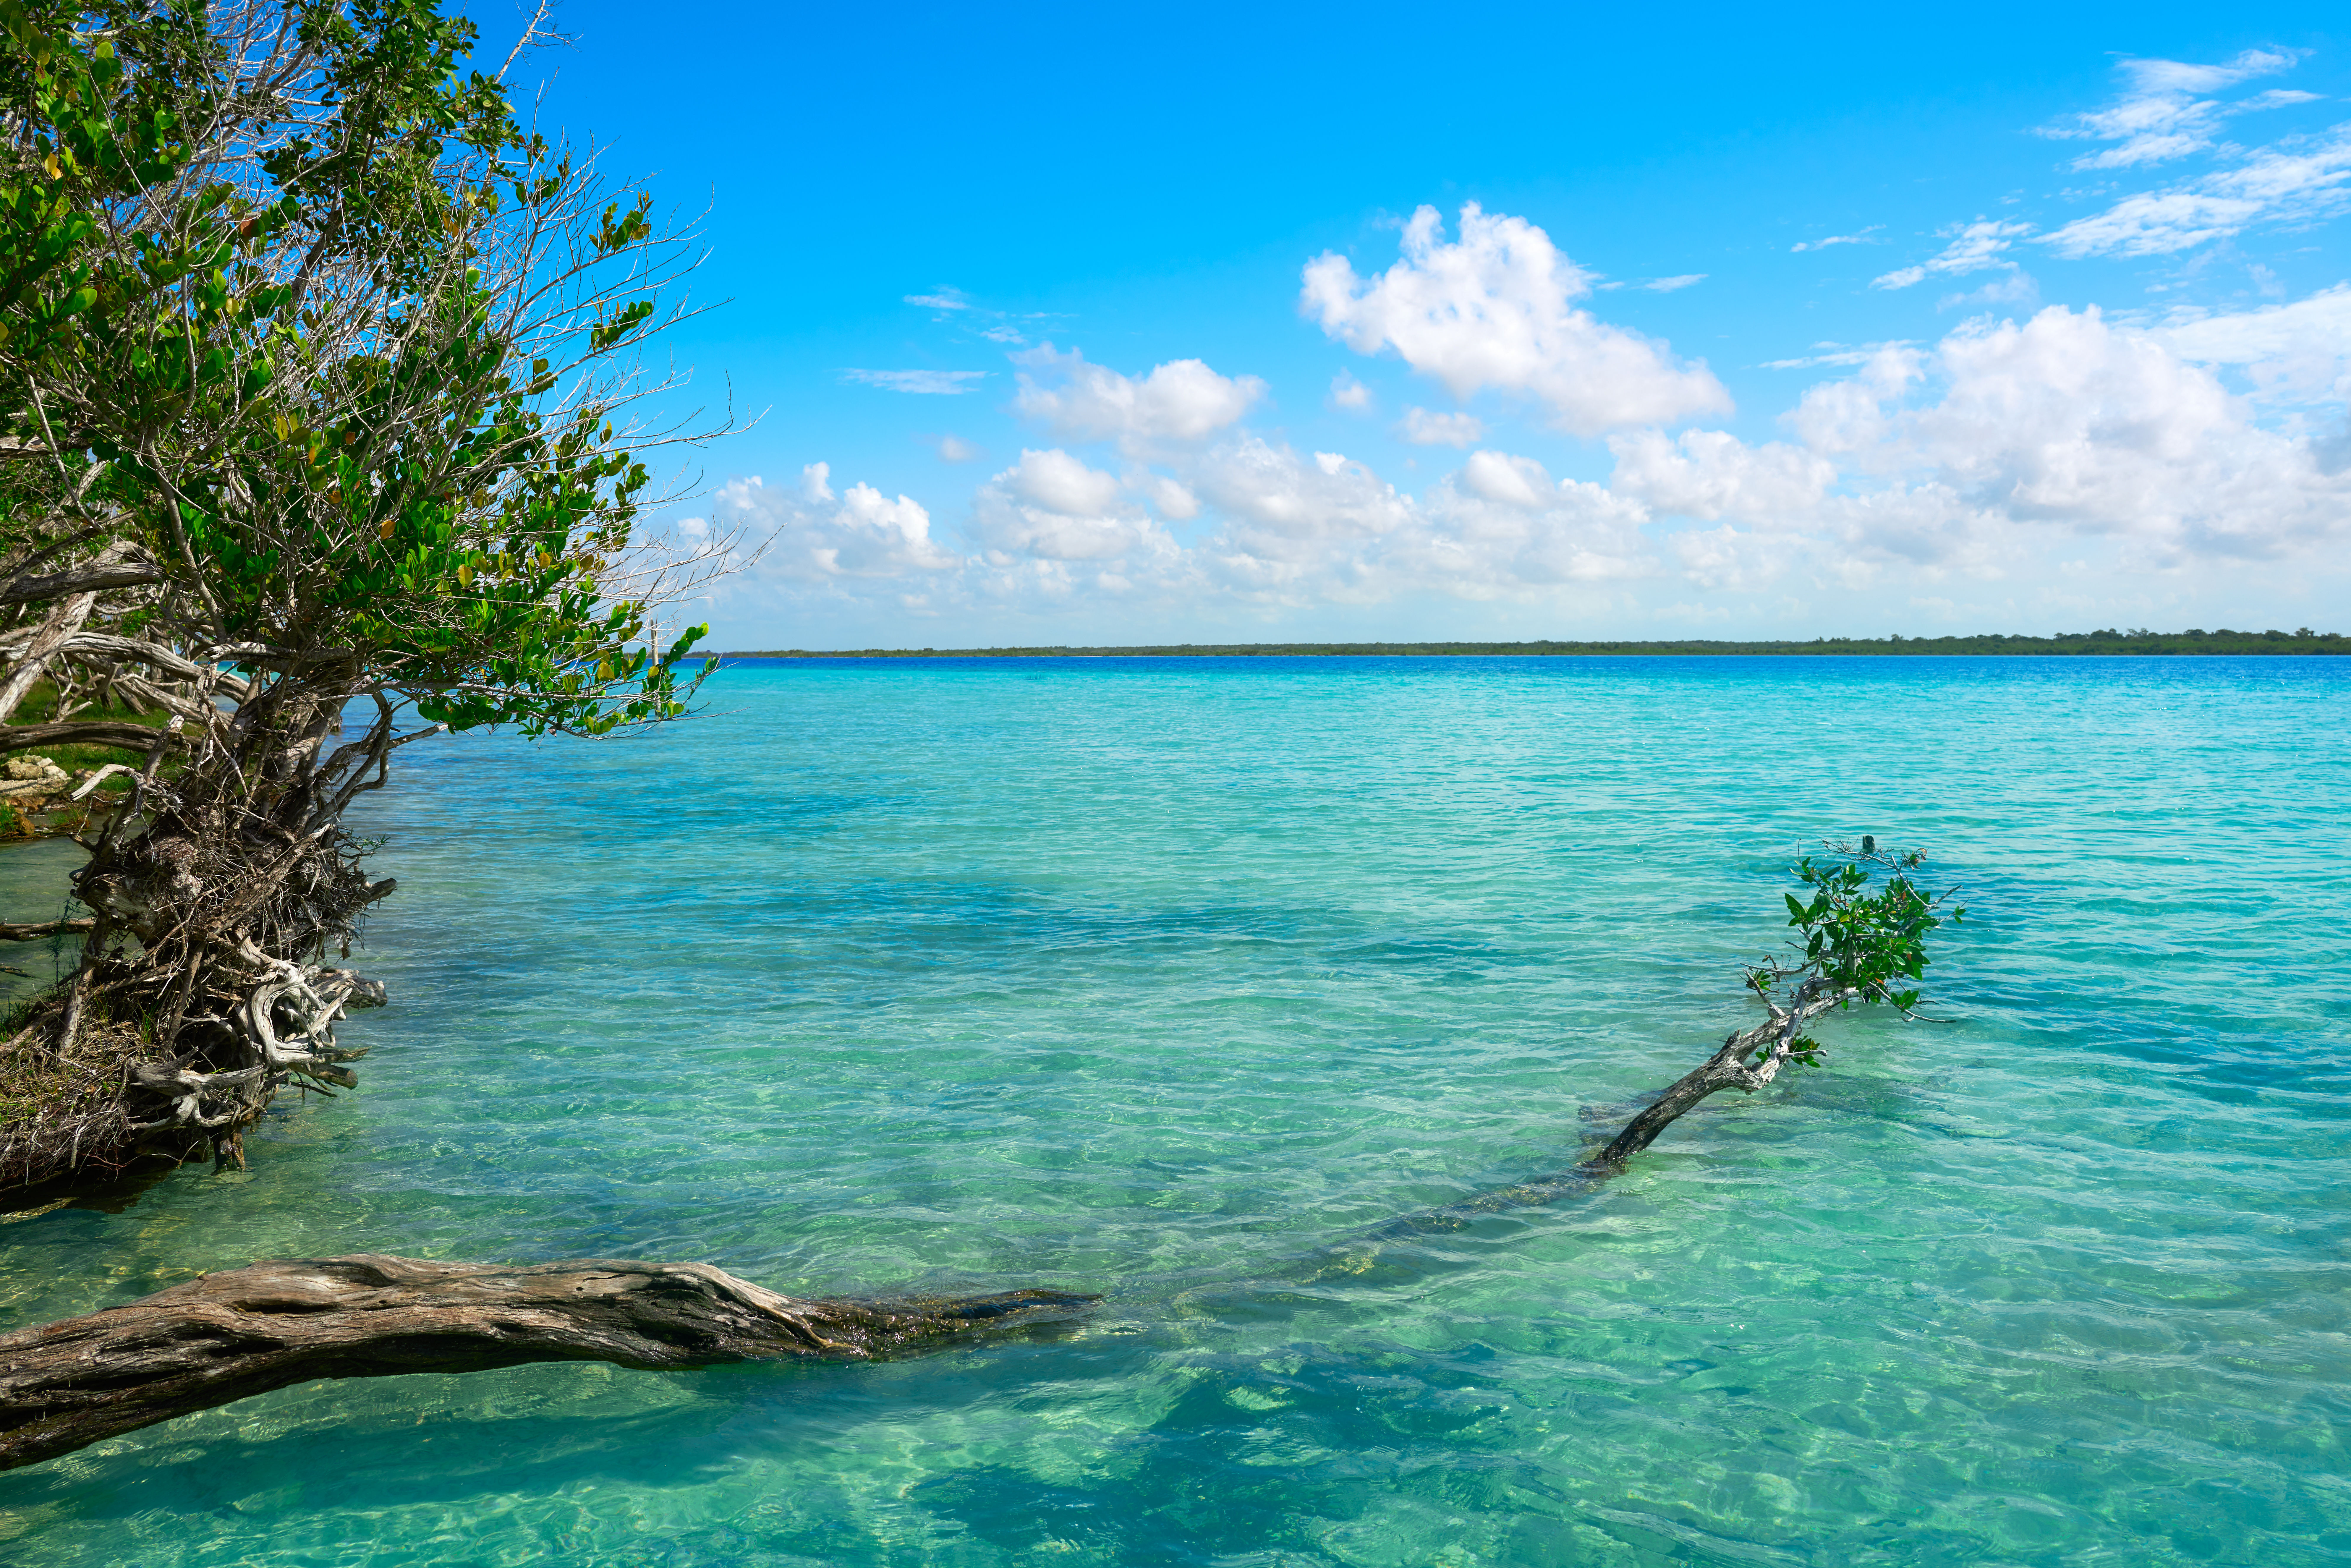 Fallen palm tree in crystal clear turquoise waters on banks of the shore in Mexico.